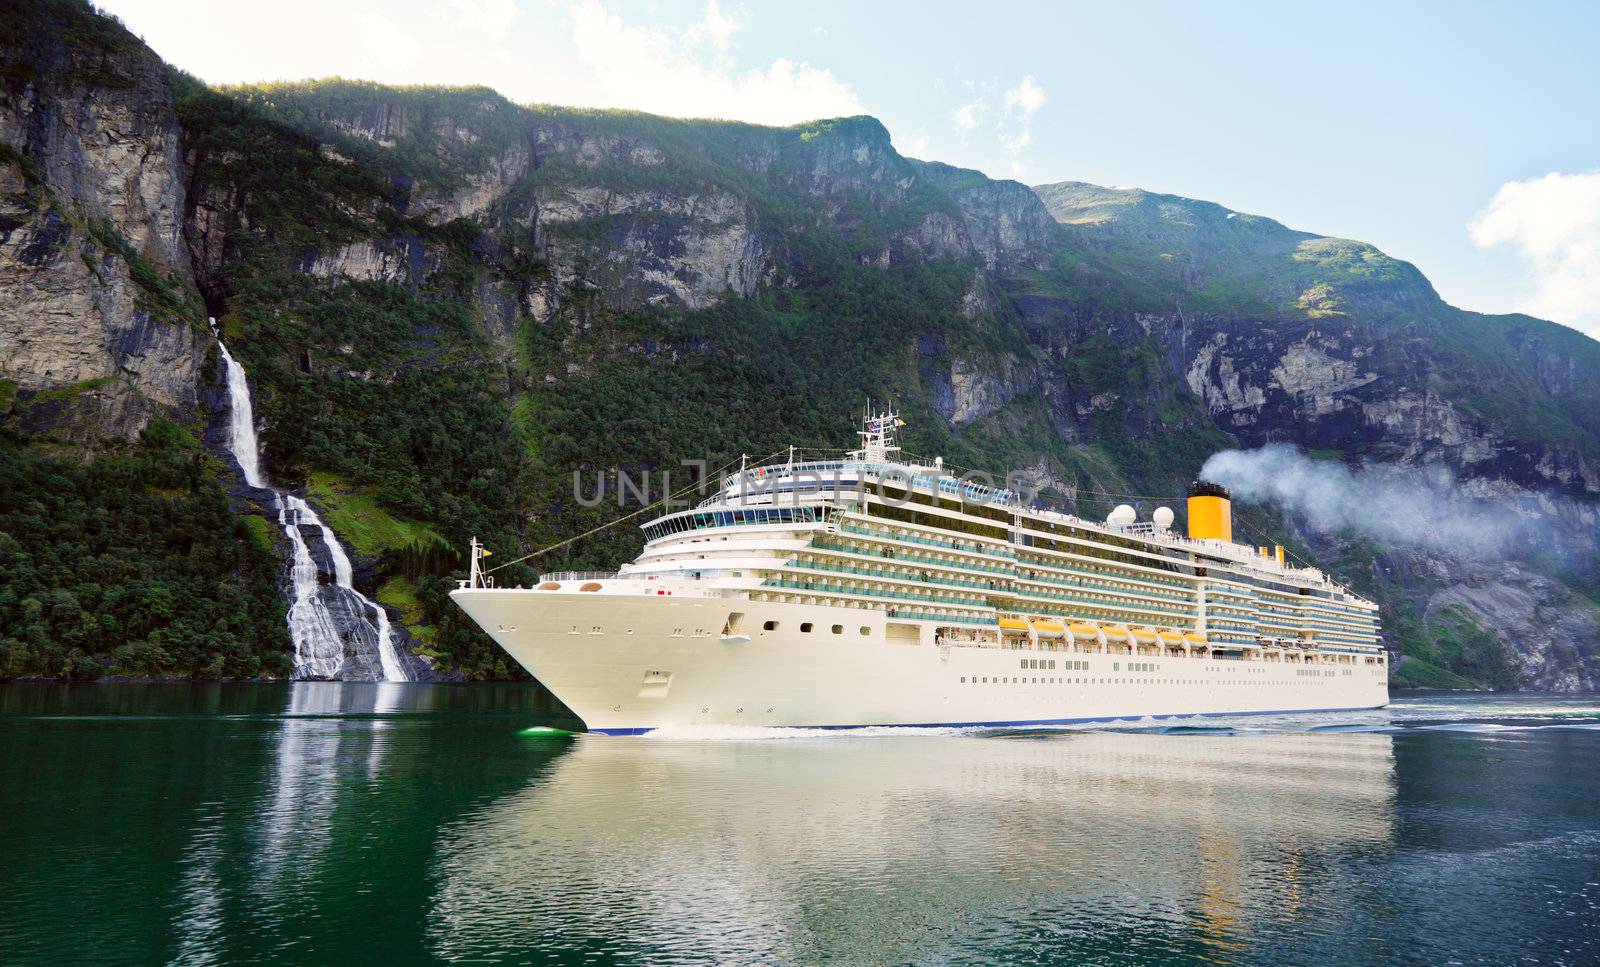 Cruise liner in the Geiranger fjord listed as a UNESCO World Heritage Site